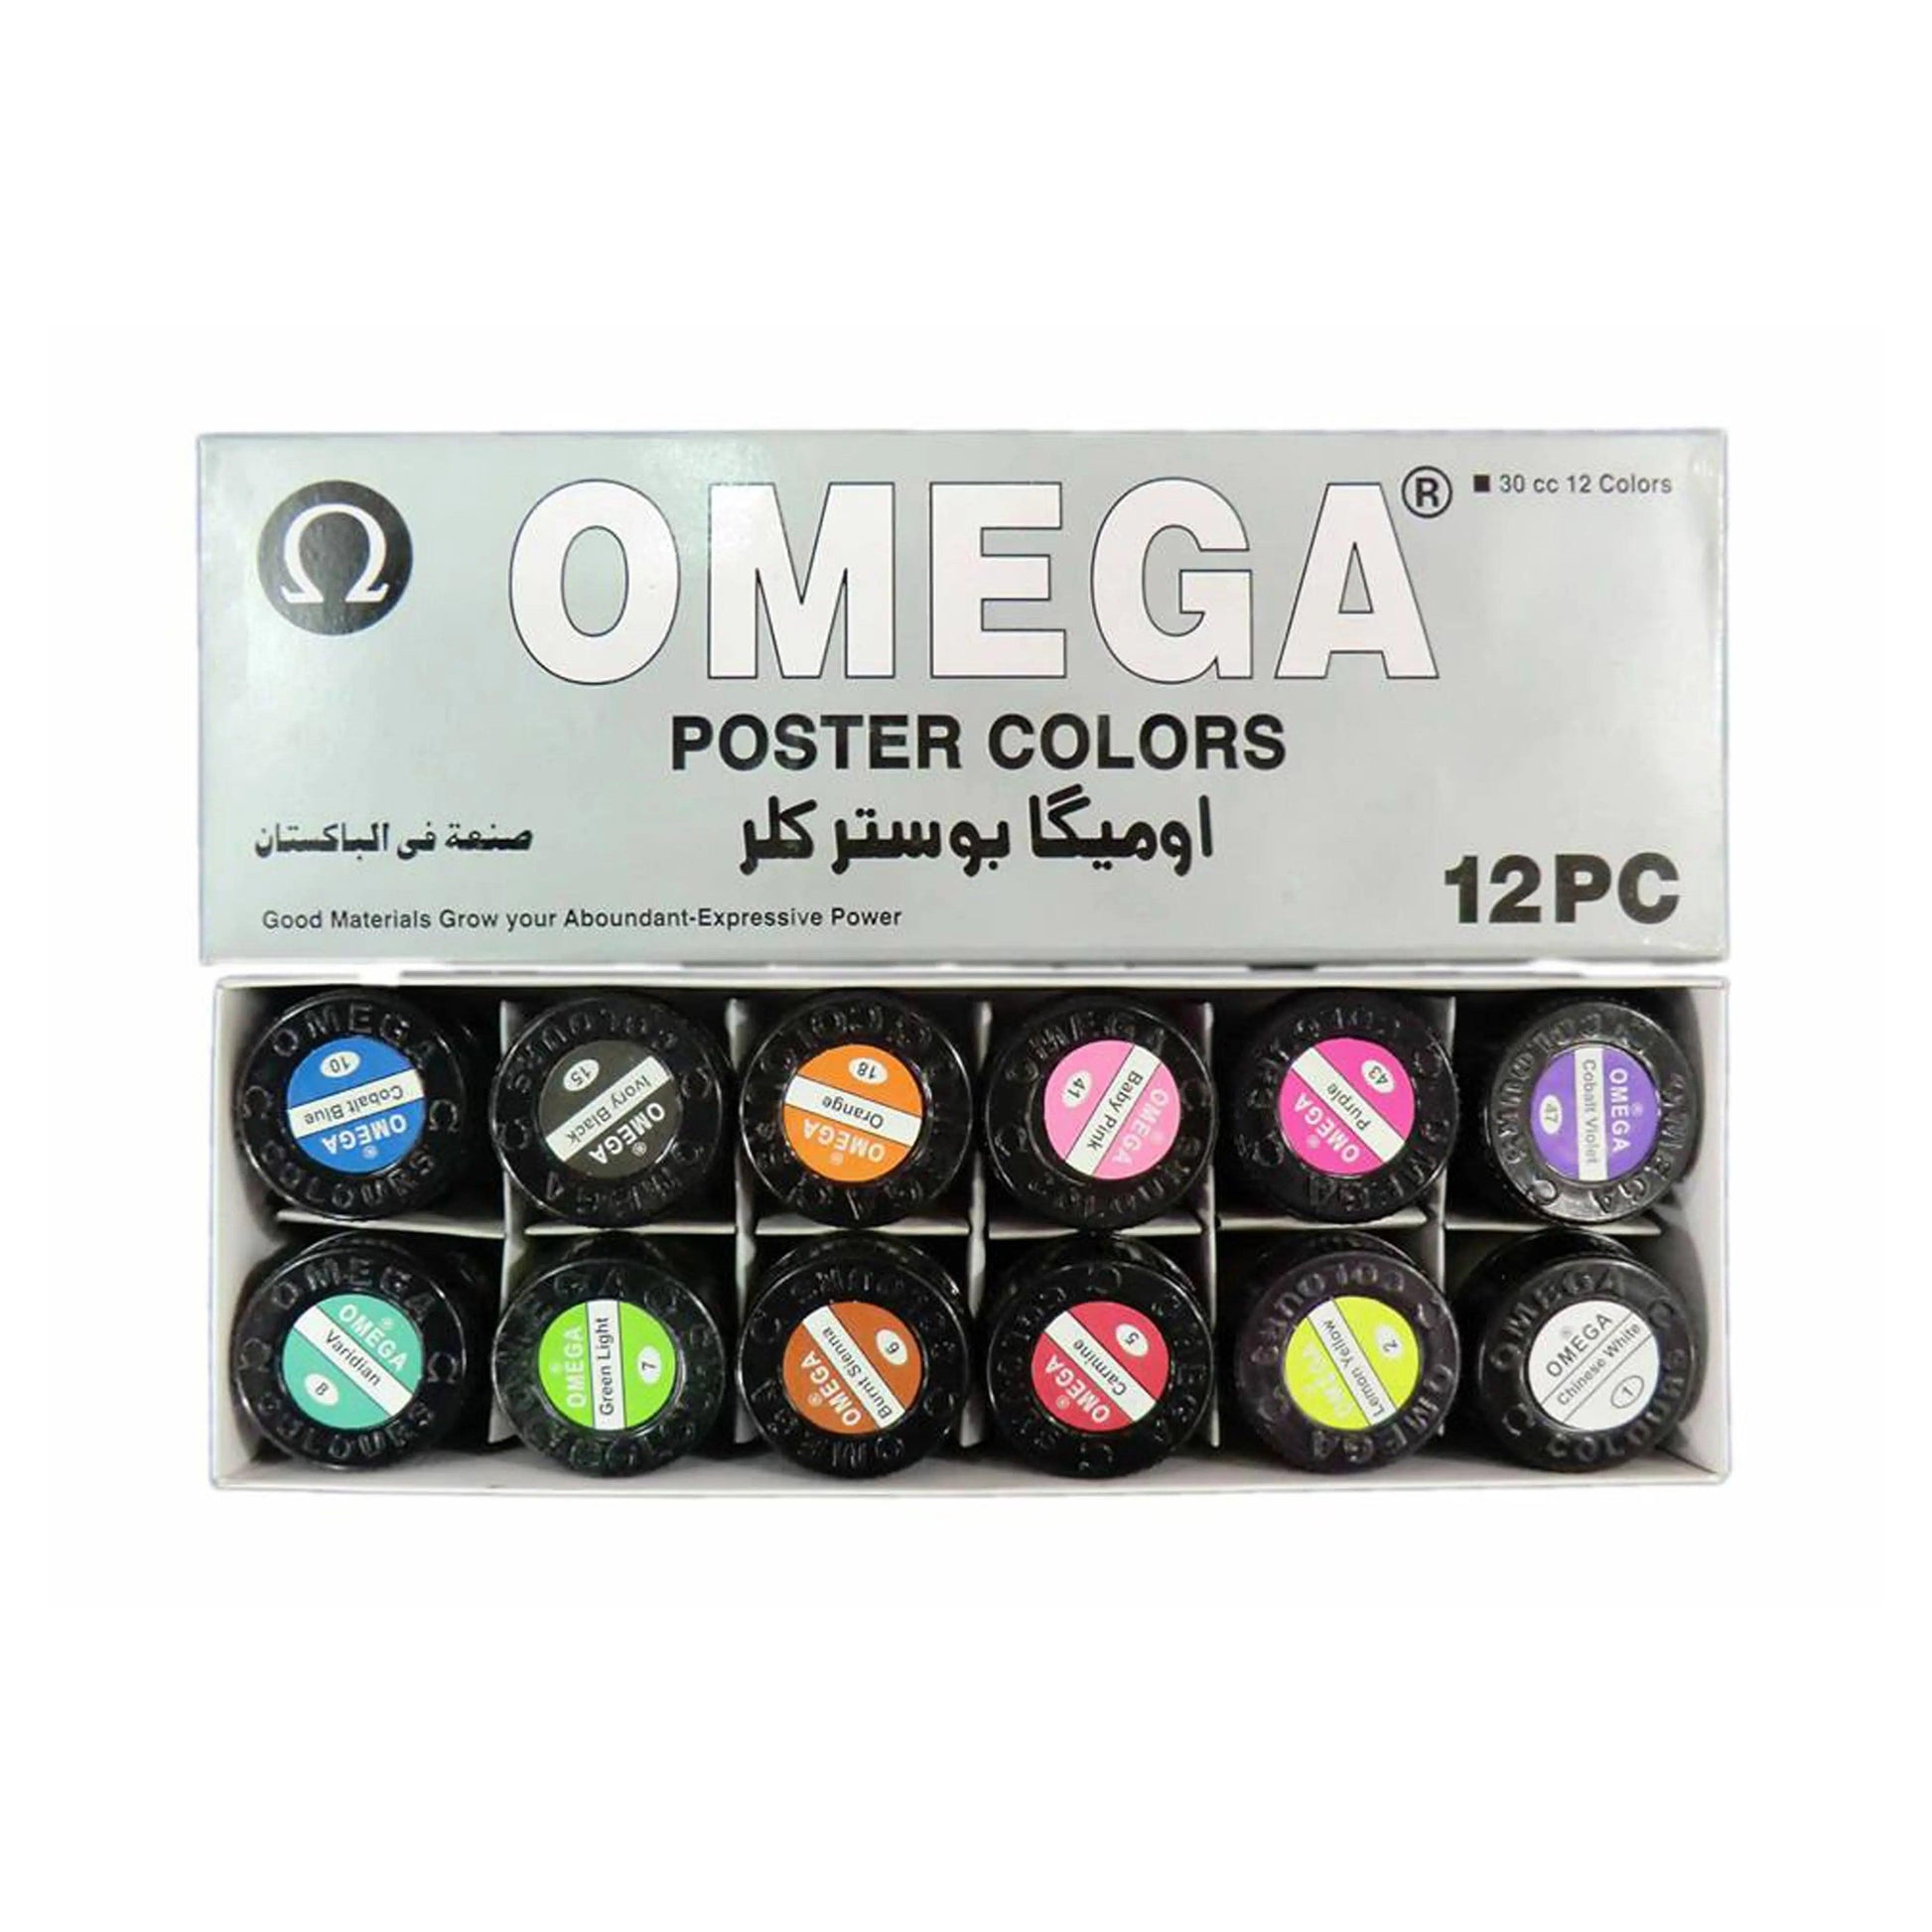 OMEGA Poster Color 12 Pieces Box PC - 01 - Multi Colors thestationers